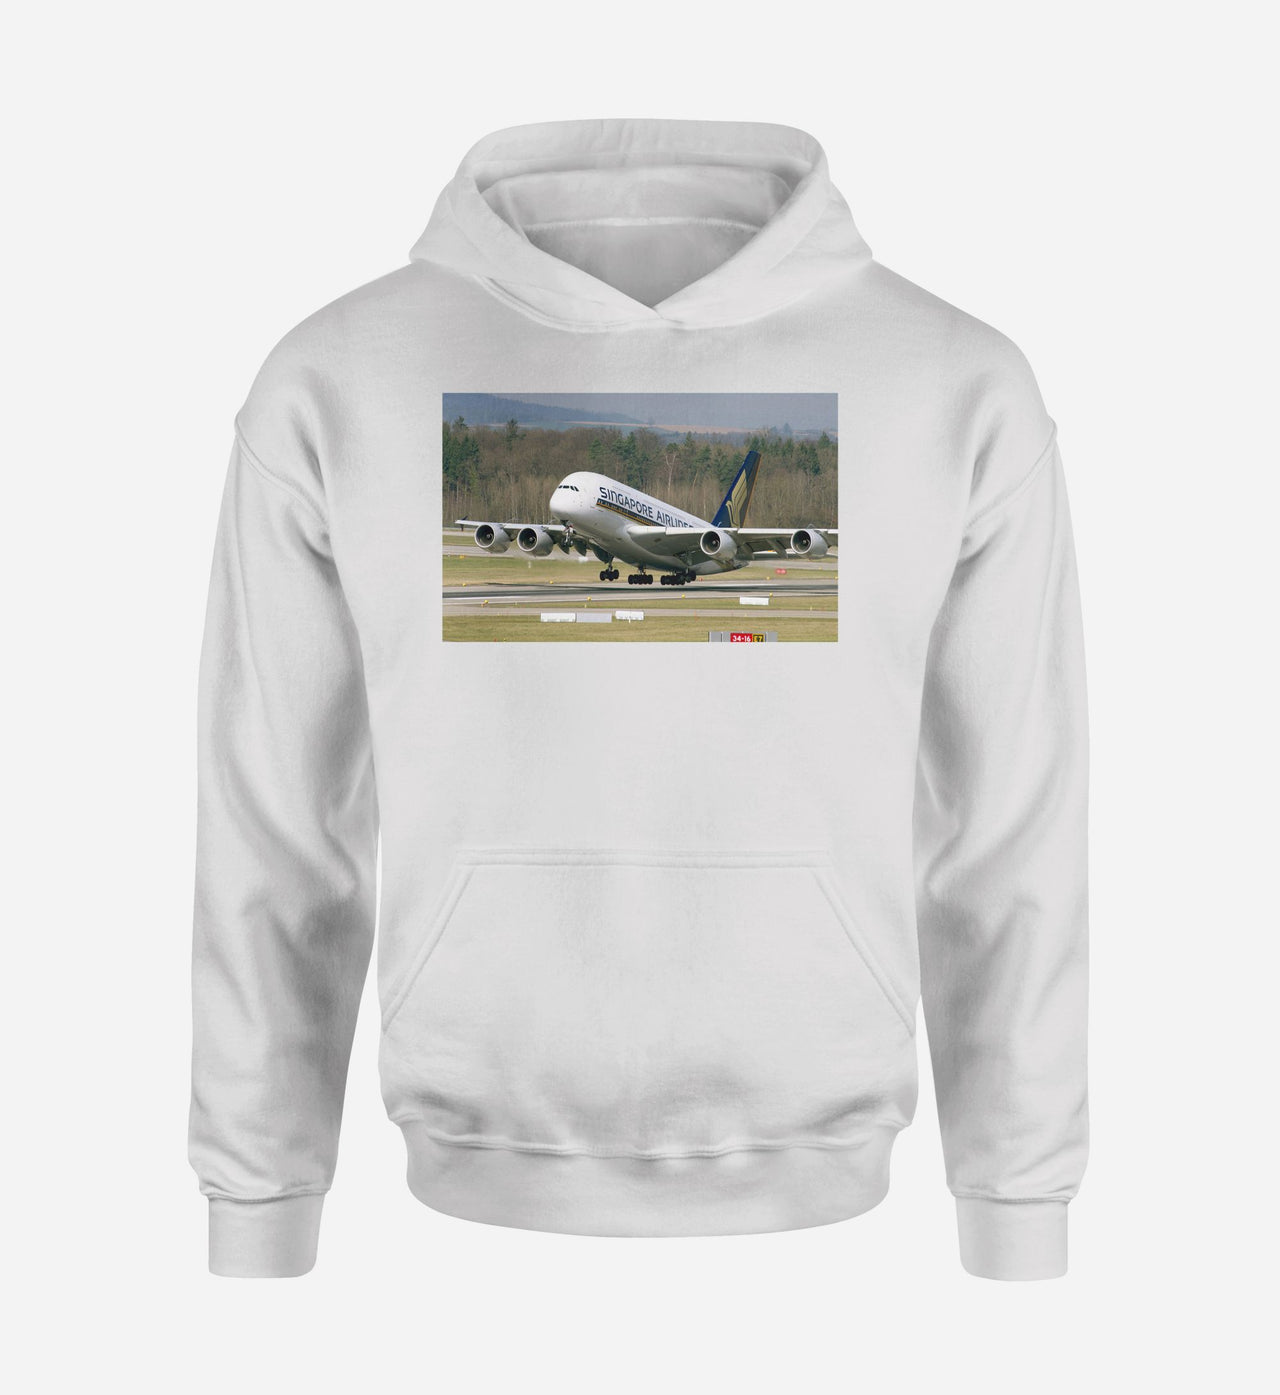 Departing Singapore Airlines A380 Designed Hoodies